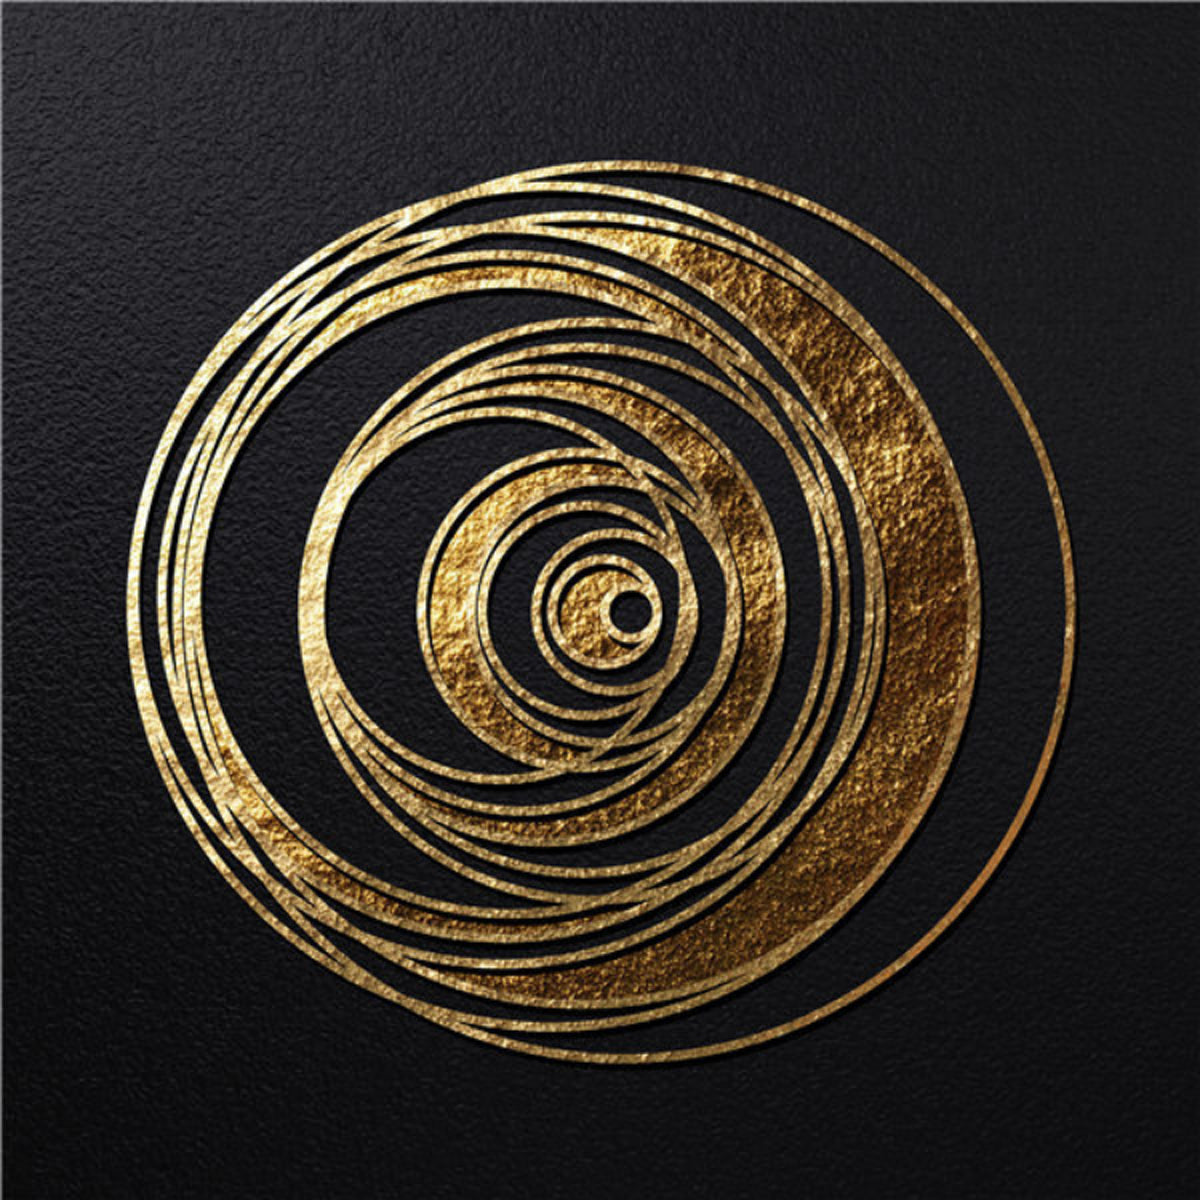 in 6 canvas / motifs gold on black print 5 si / Traumpreisfabrik TPFLiving abstract art –